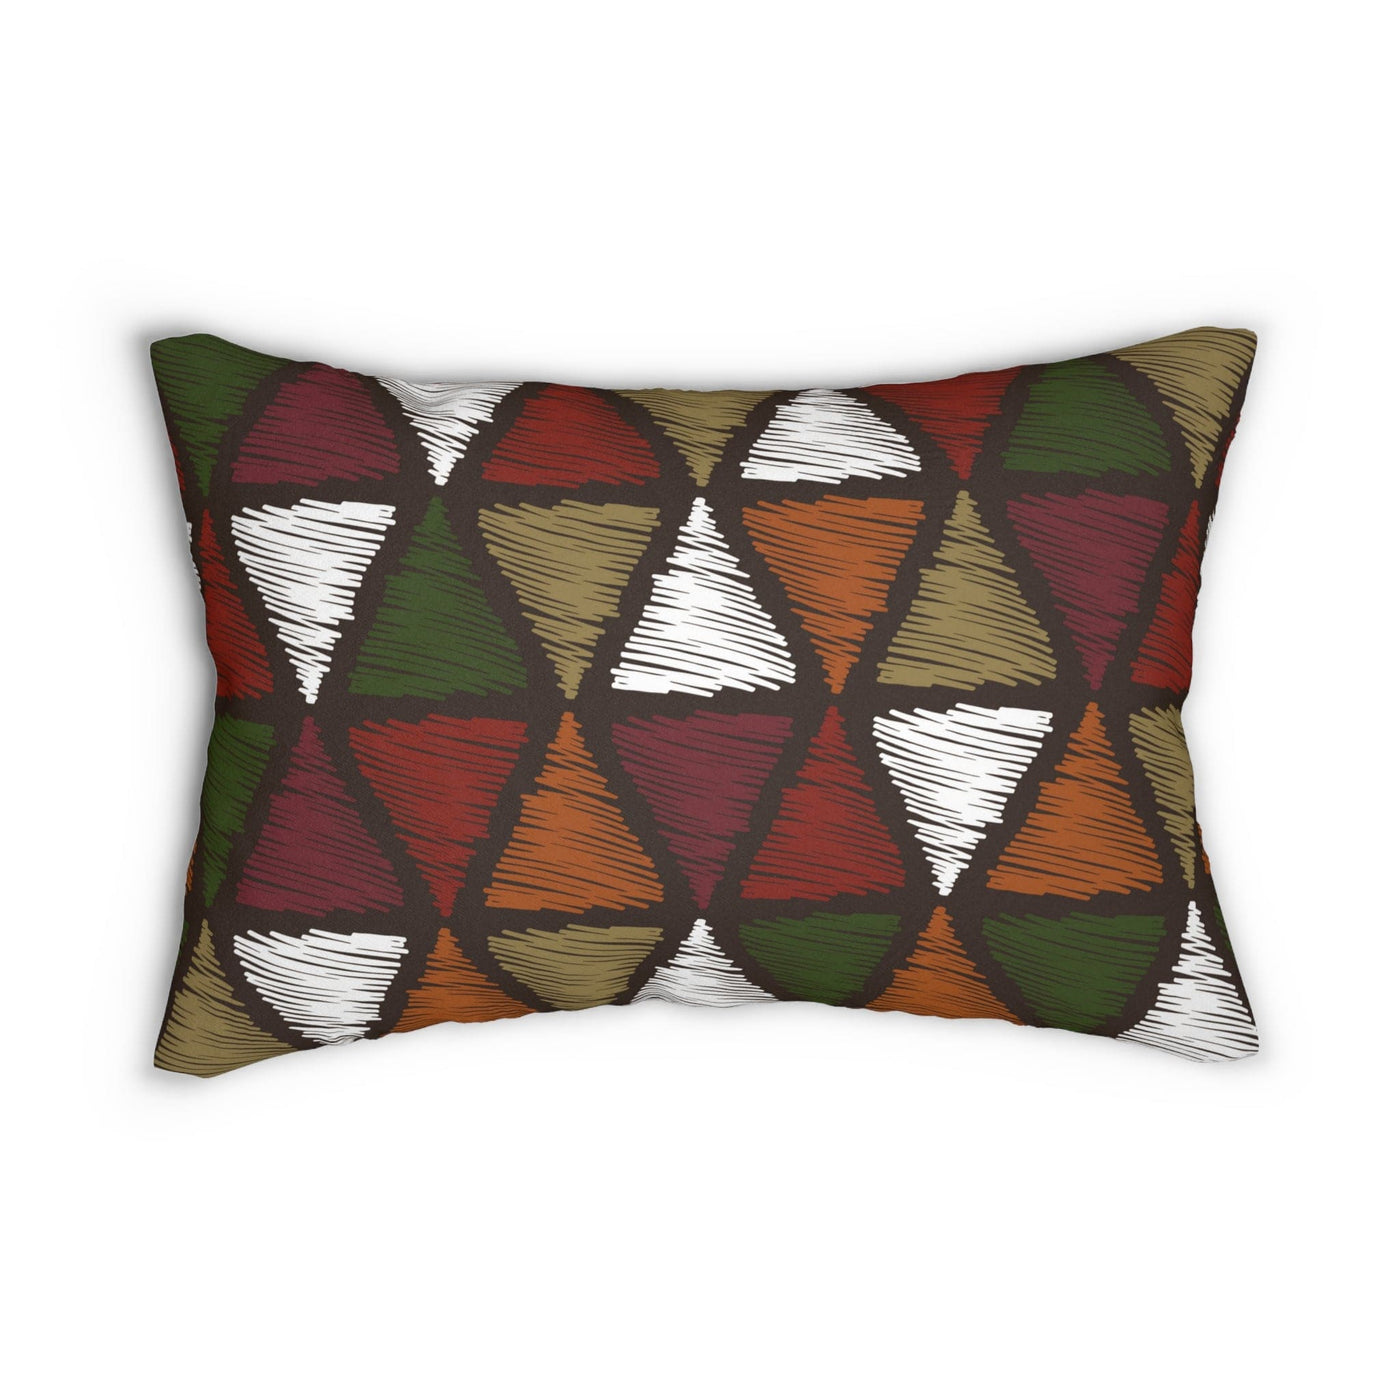 Decorative Lumbar Throw Pillow - Forest Green And White Tribal Quilting Fabric